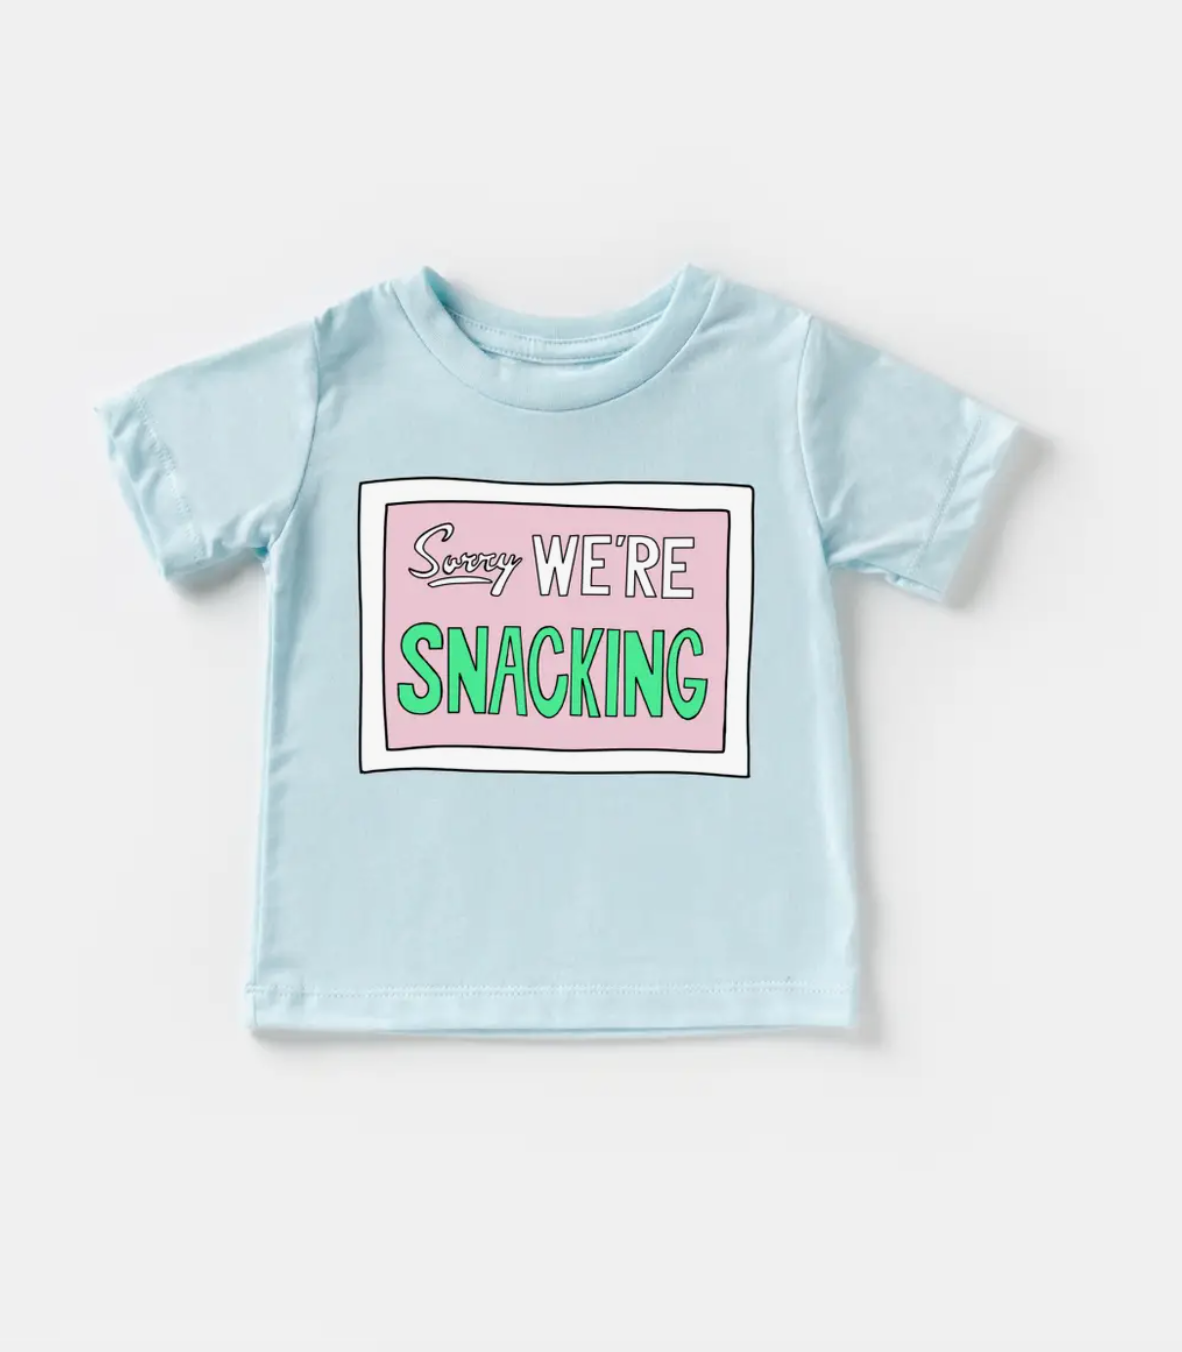 Sorry We'Re Snacking Tee